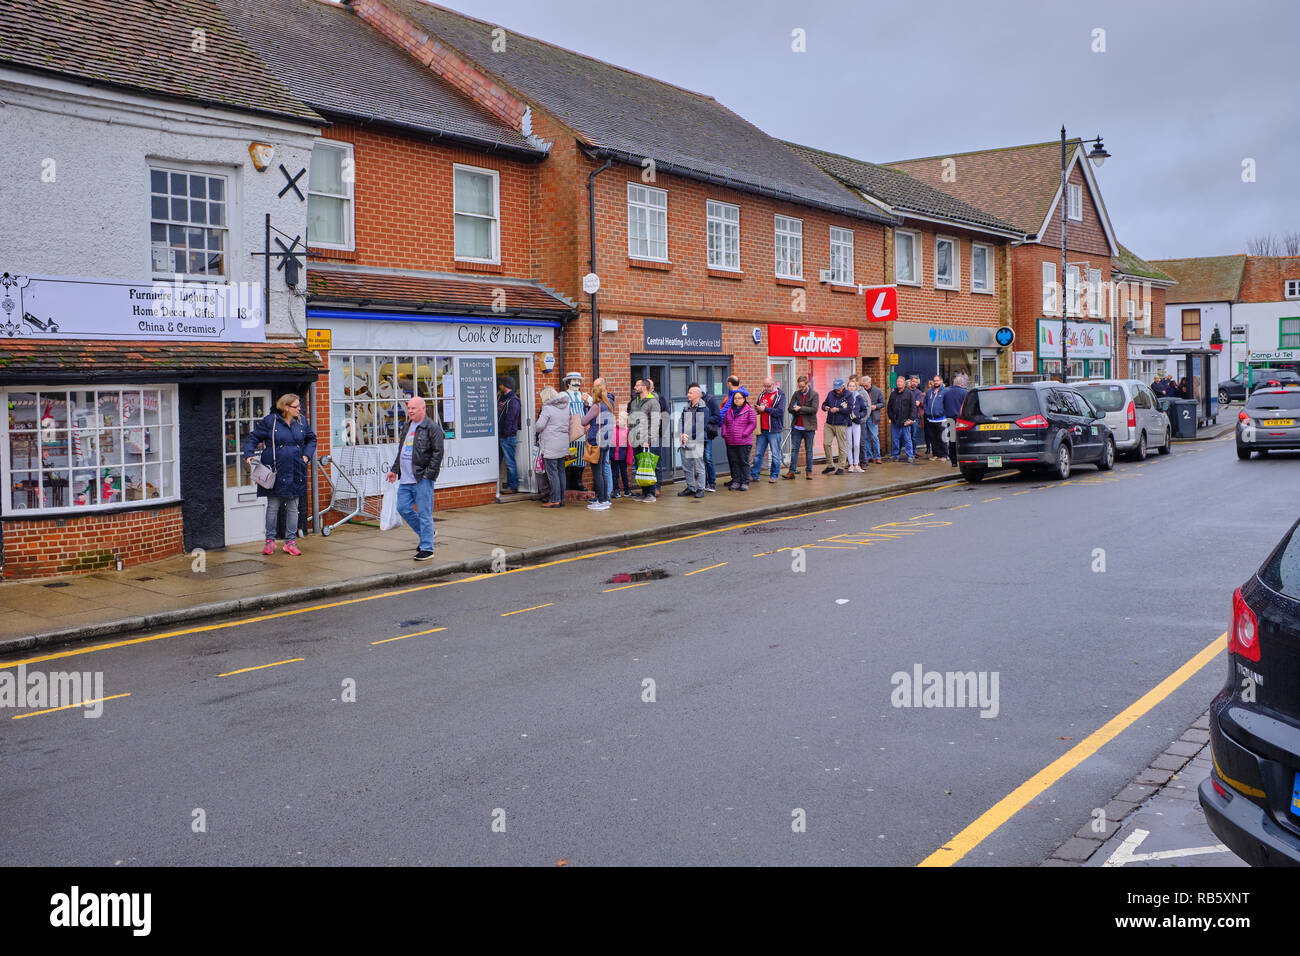 A long queue of people on the pavement waiting to enter the local butchers shop near Christmas in Thatcham high street, Berkshire, UK Stock Photo